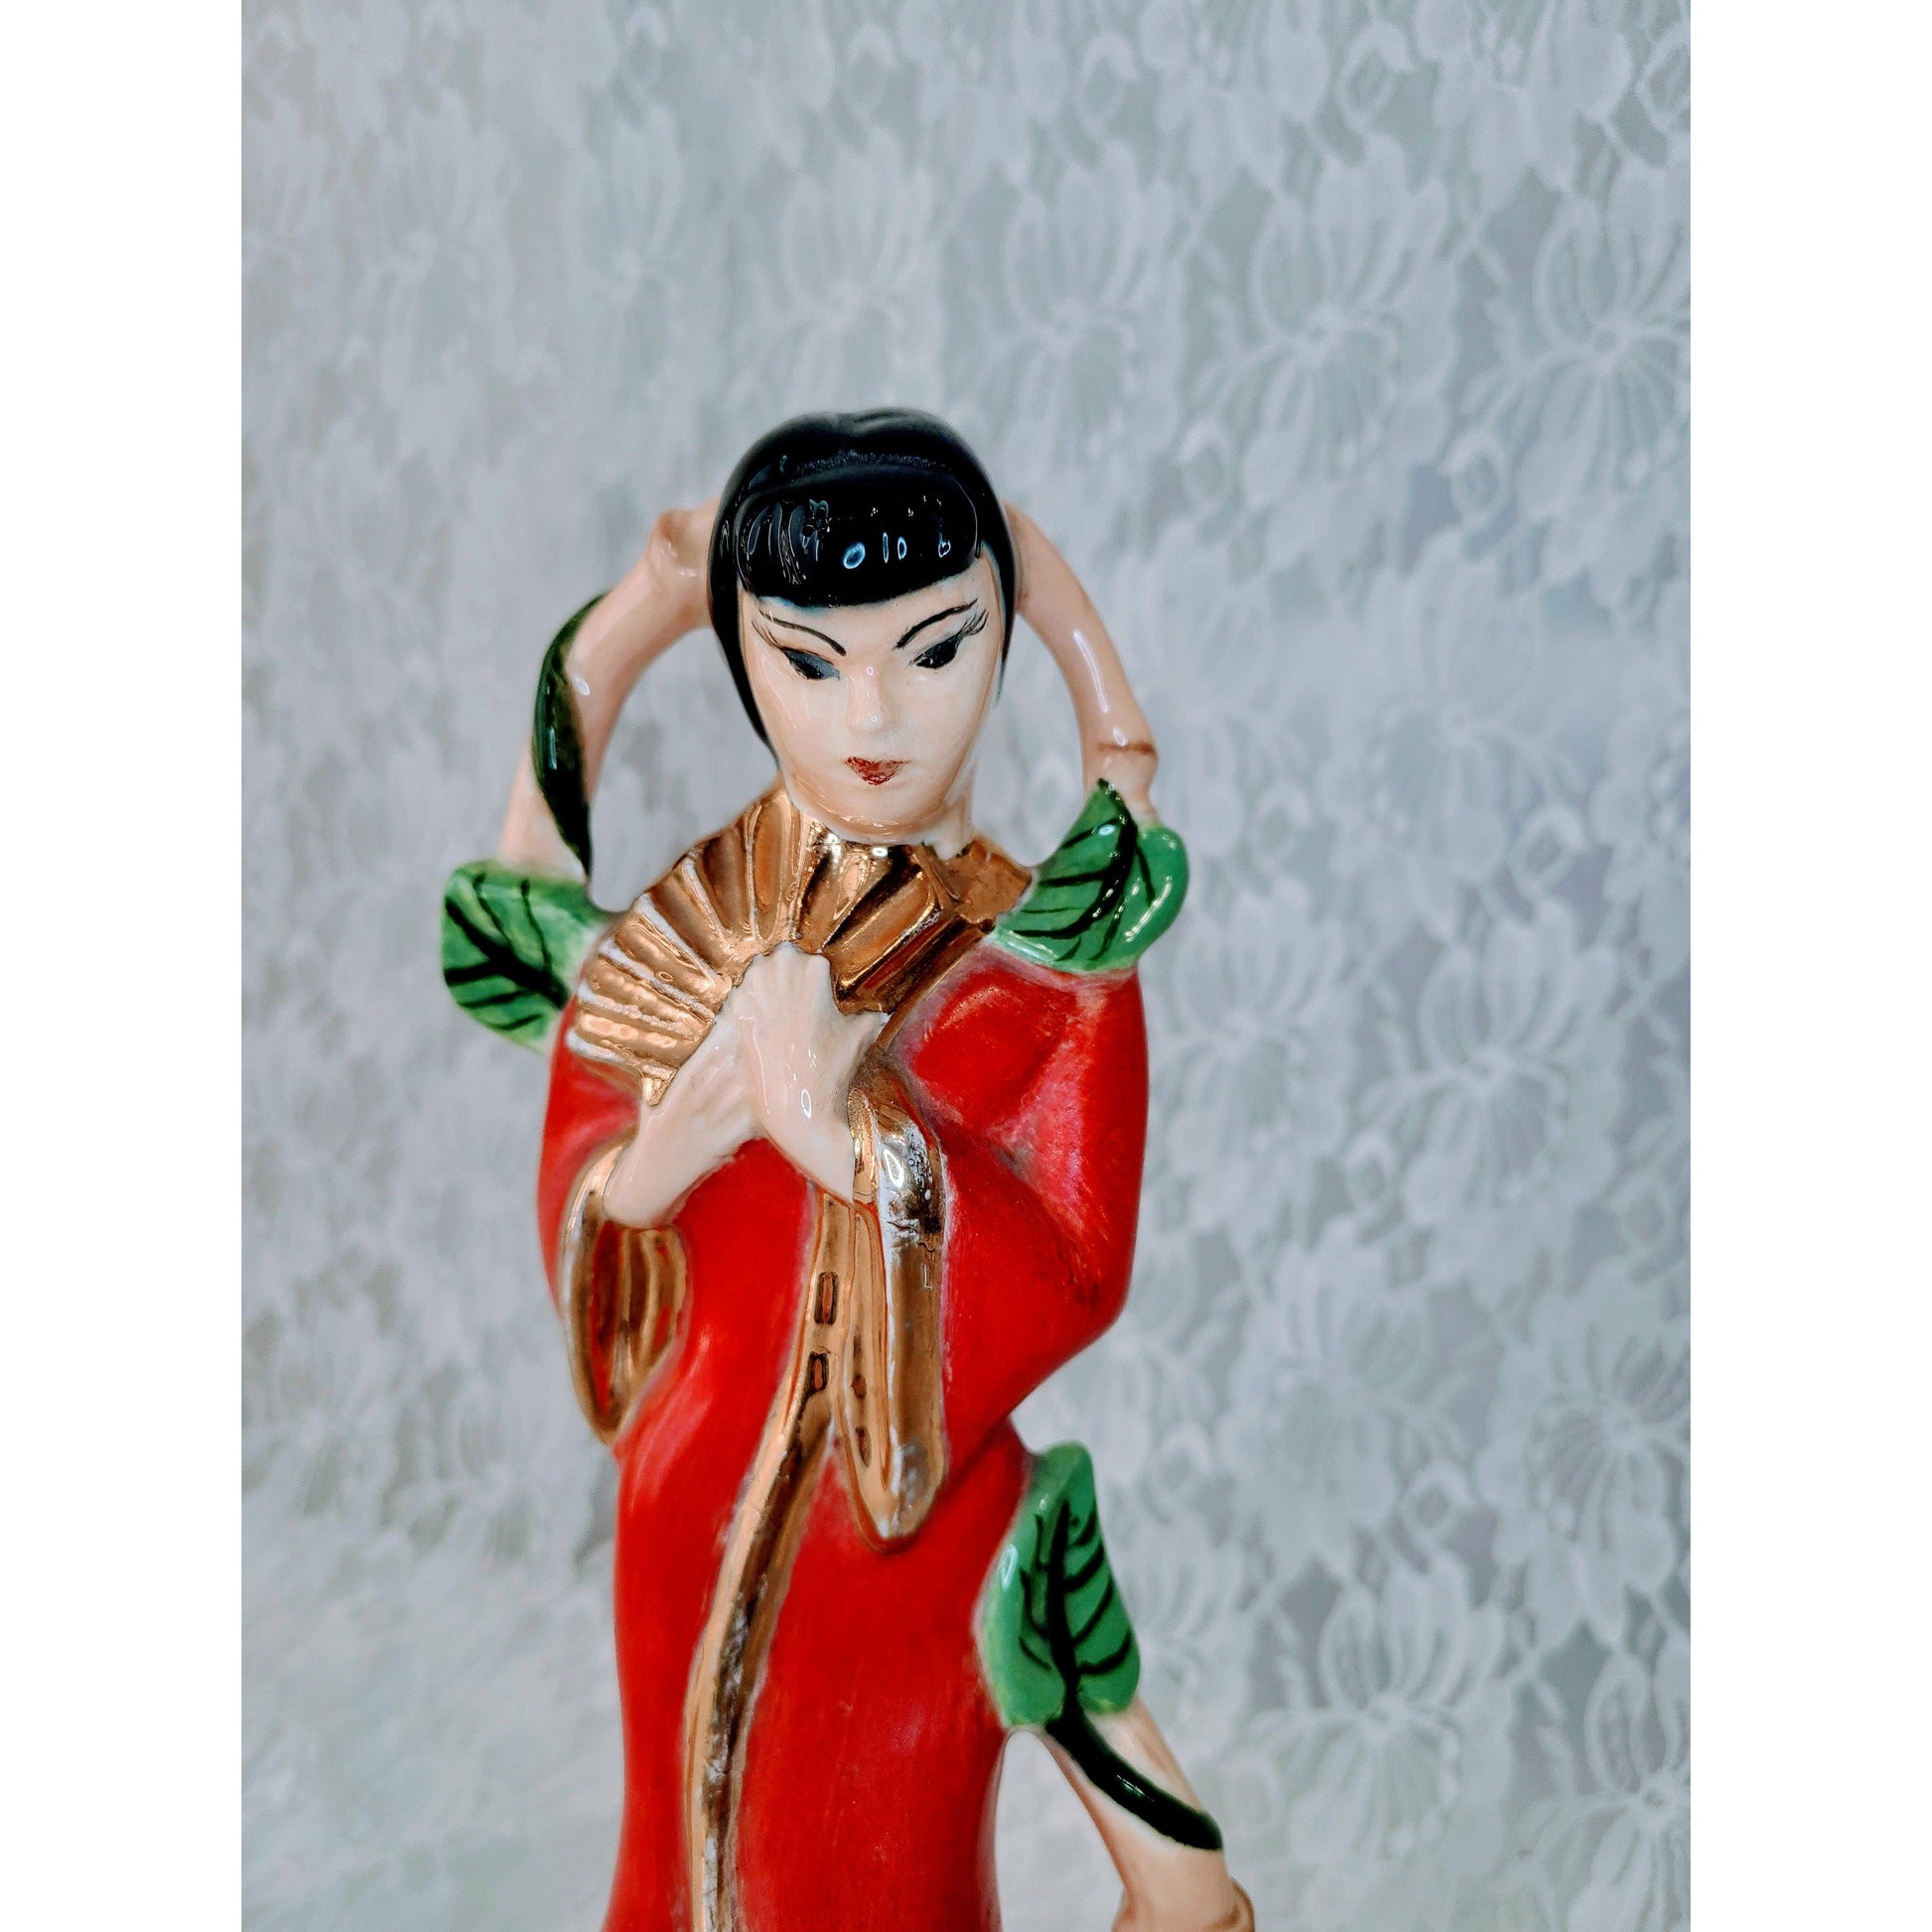 Asian Lady Woman Statue Figurine ~Vintage 1950s Max Weil California Pottery USA ~ Retro Kitsch ~ Vibrant Colors ~ Signed "California" ~ Gift for Mom